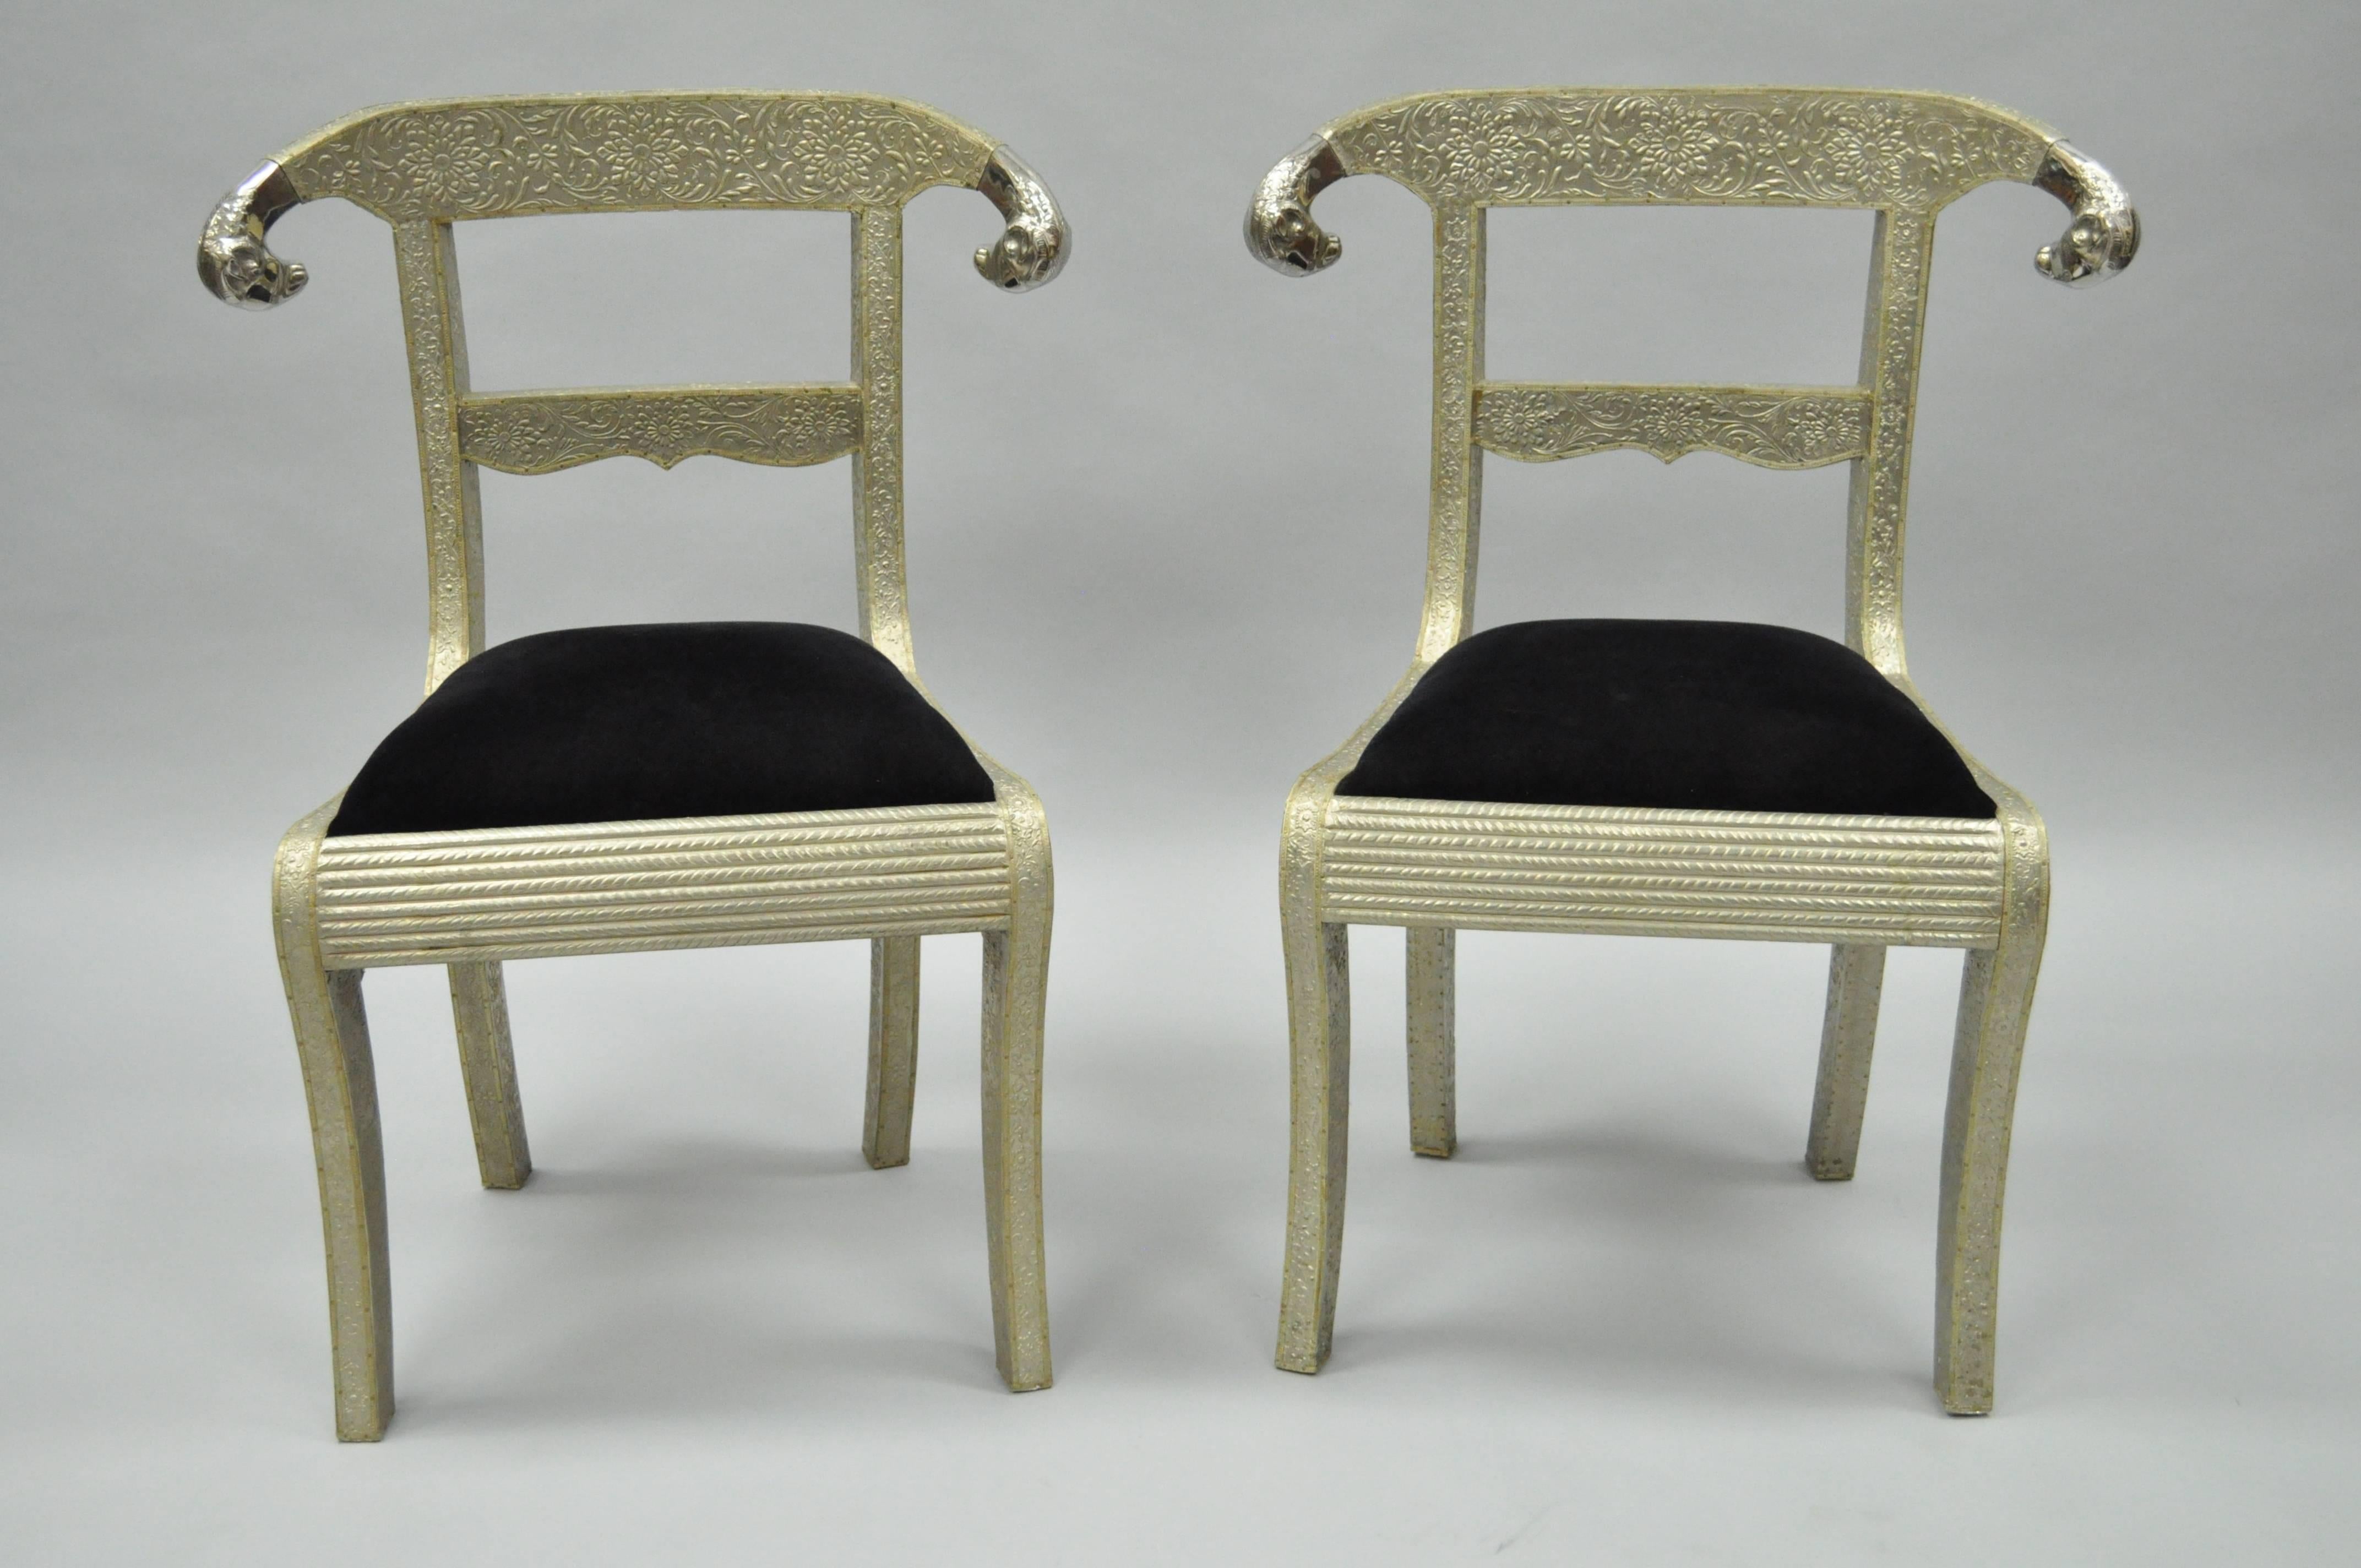 Desirable pair of vintage Anglo-Indian dowry side chairs with ram's head accents. These wonderful chairs feature wooden frames clad in floral embossed silver metal and polished scrolling rams heads. Seats are upholstered in a black velvet fabric.